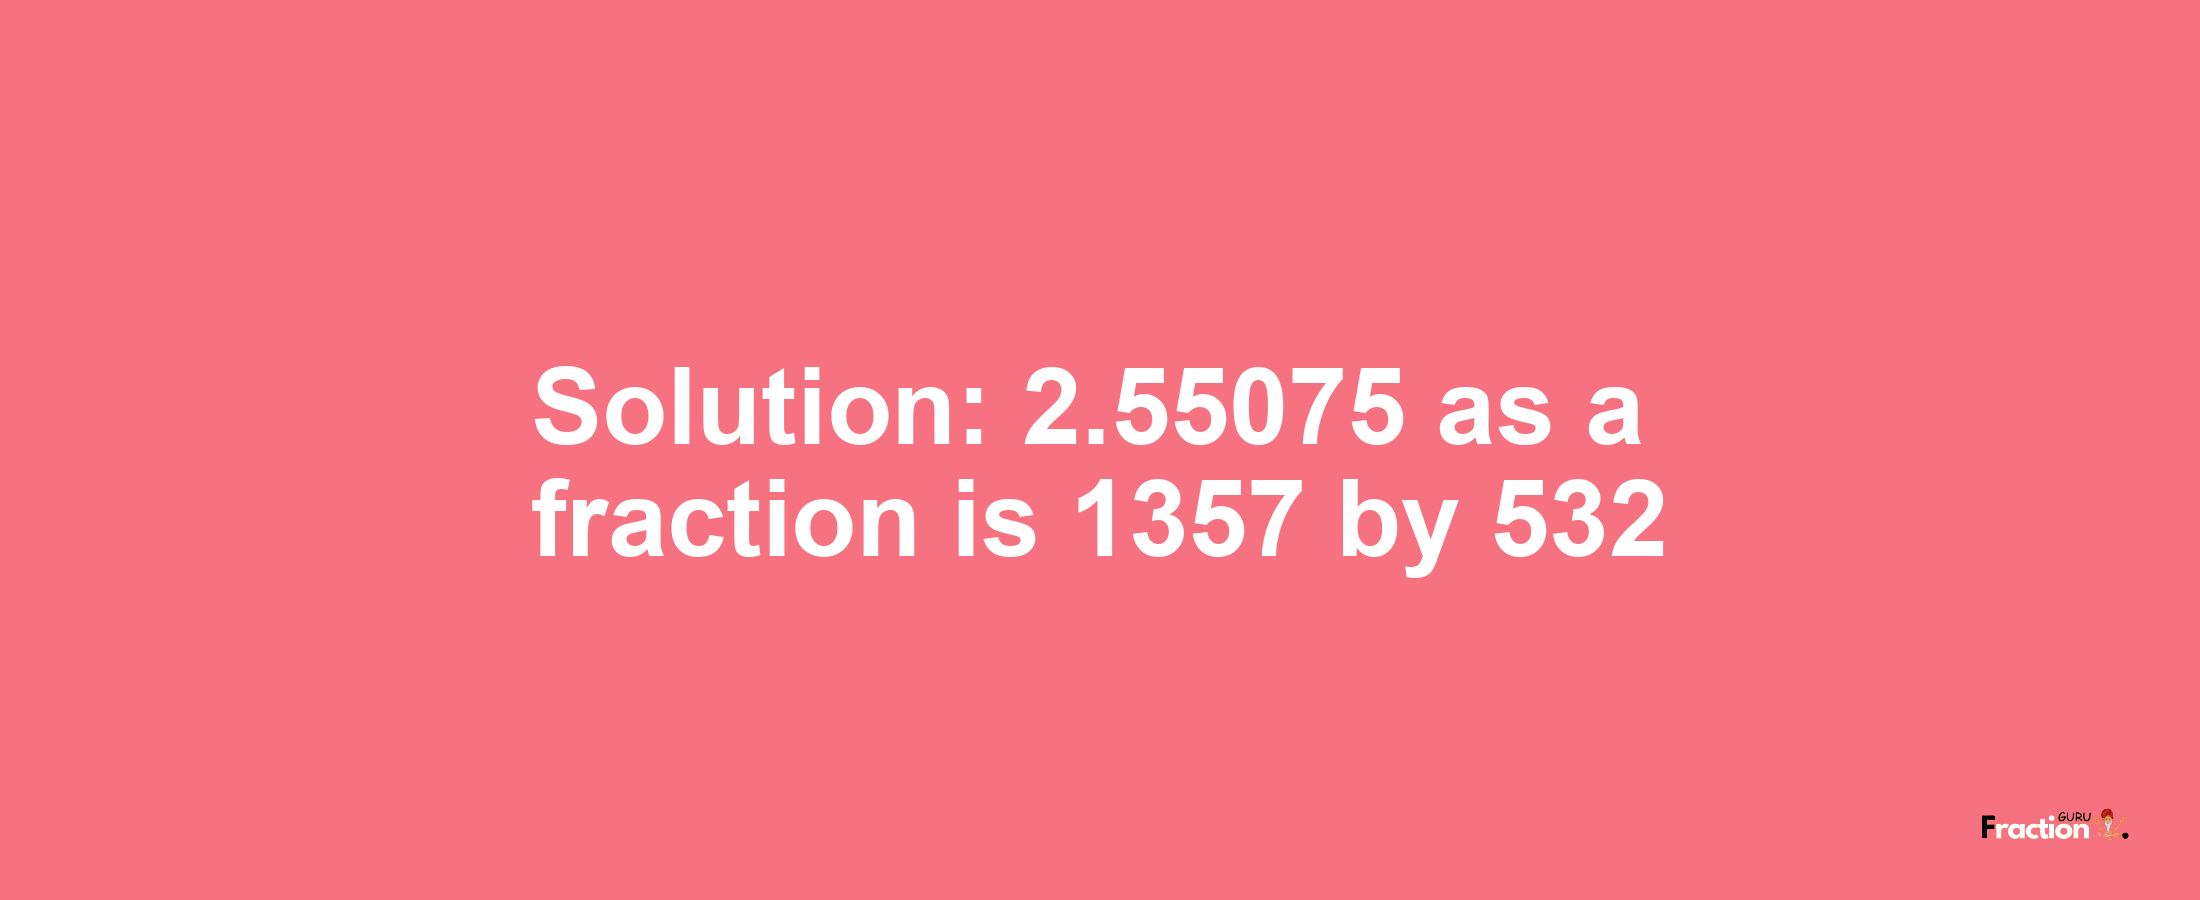 Solution:2.55075 as a fraction is 1357/532